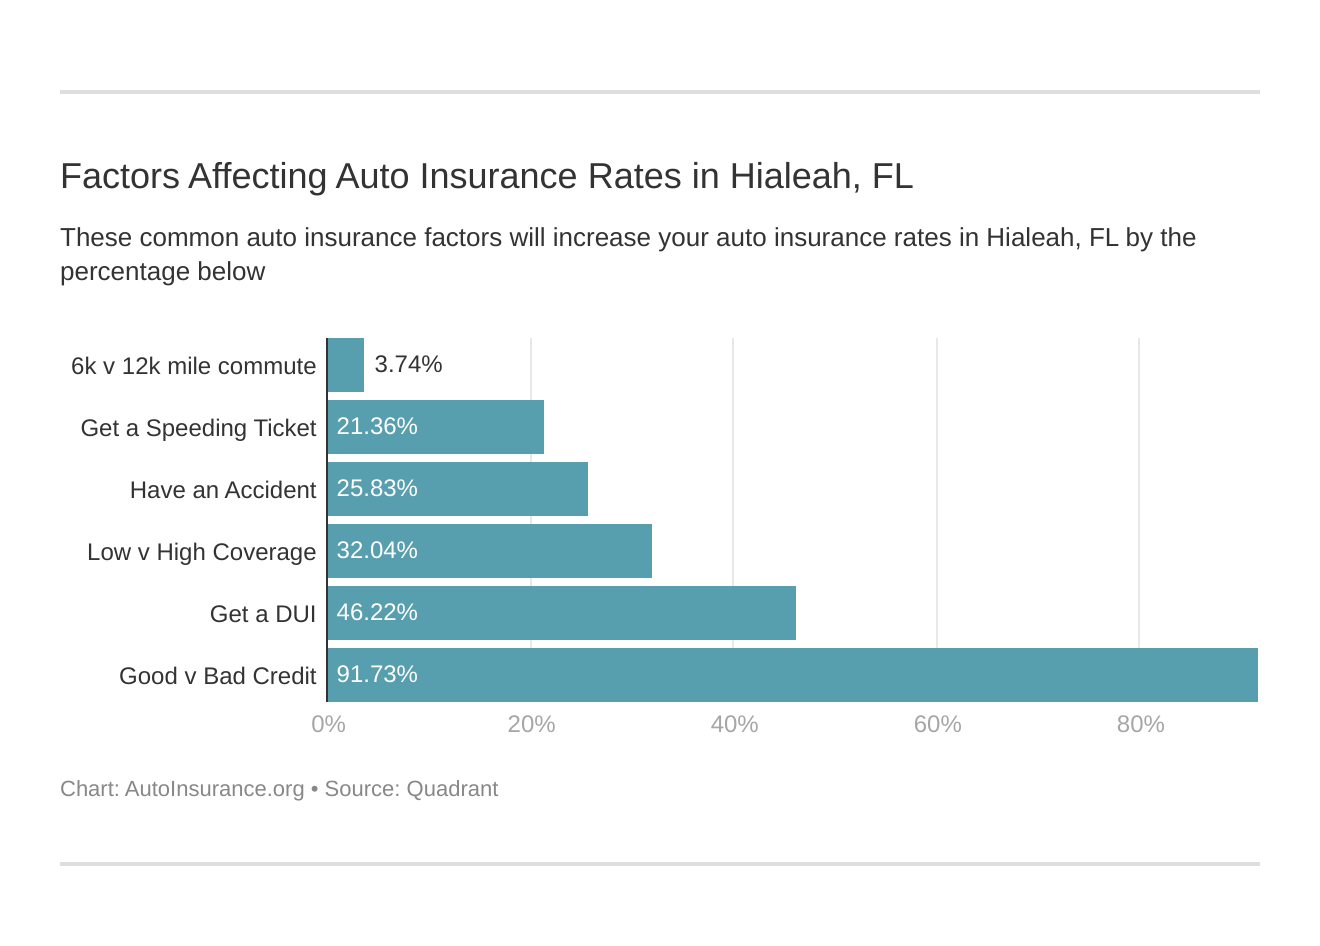 Factors Affecting Auto Insurance Rates in Hialeah, FL